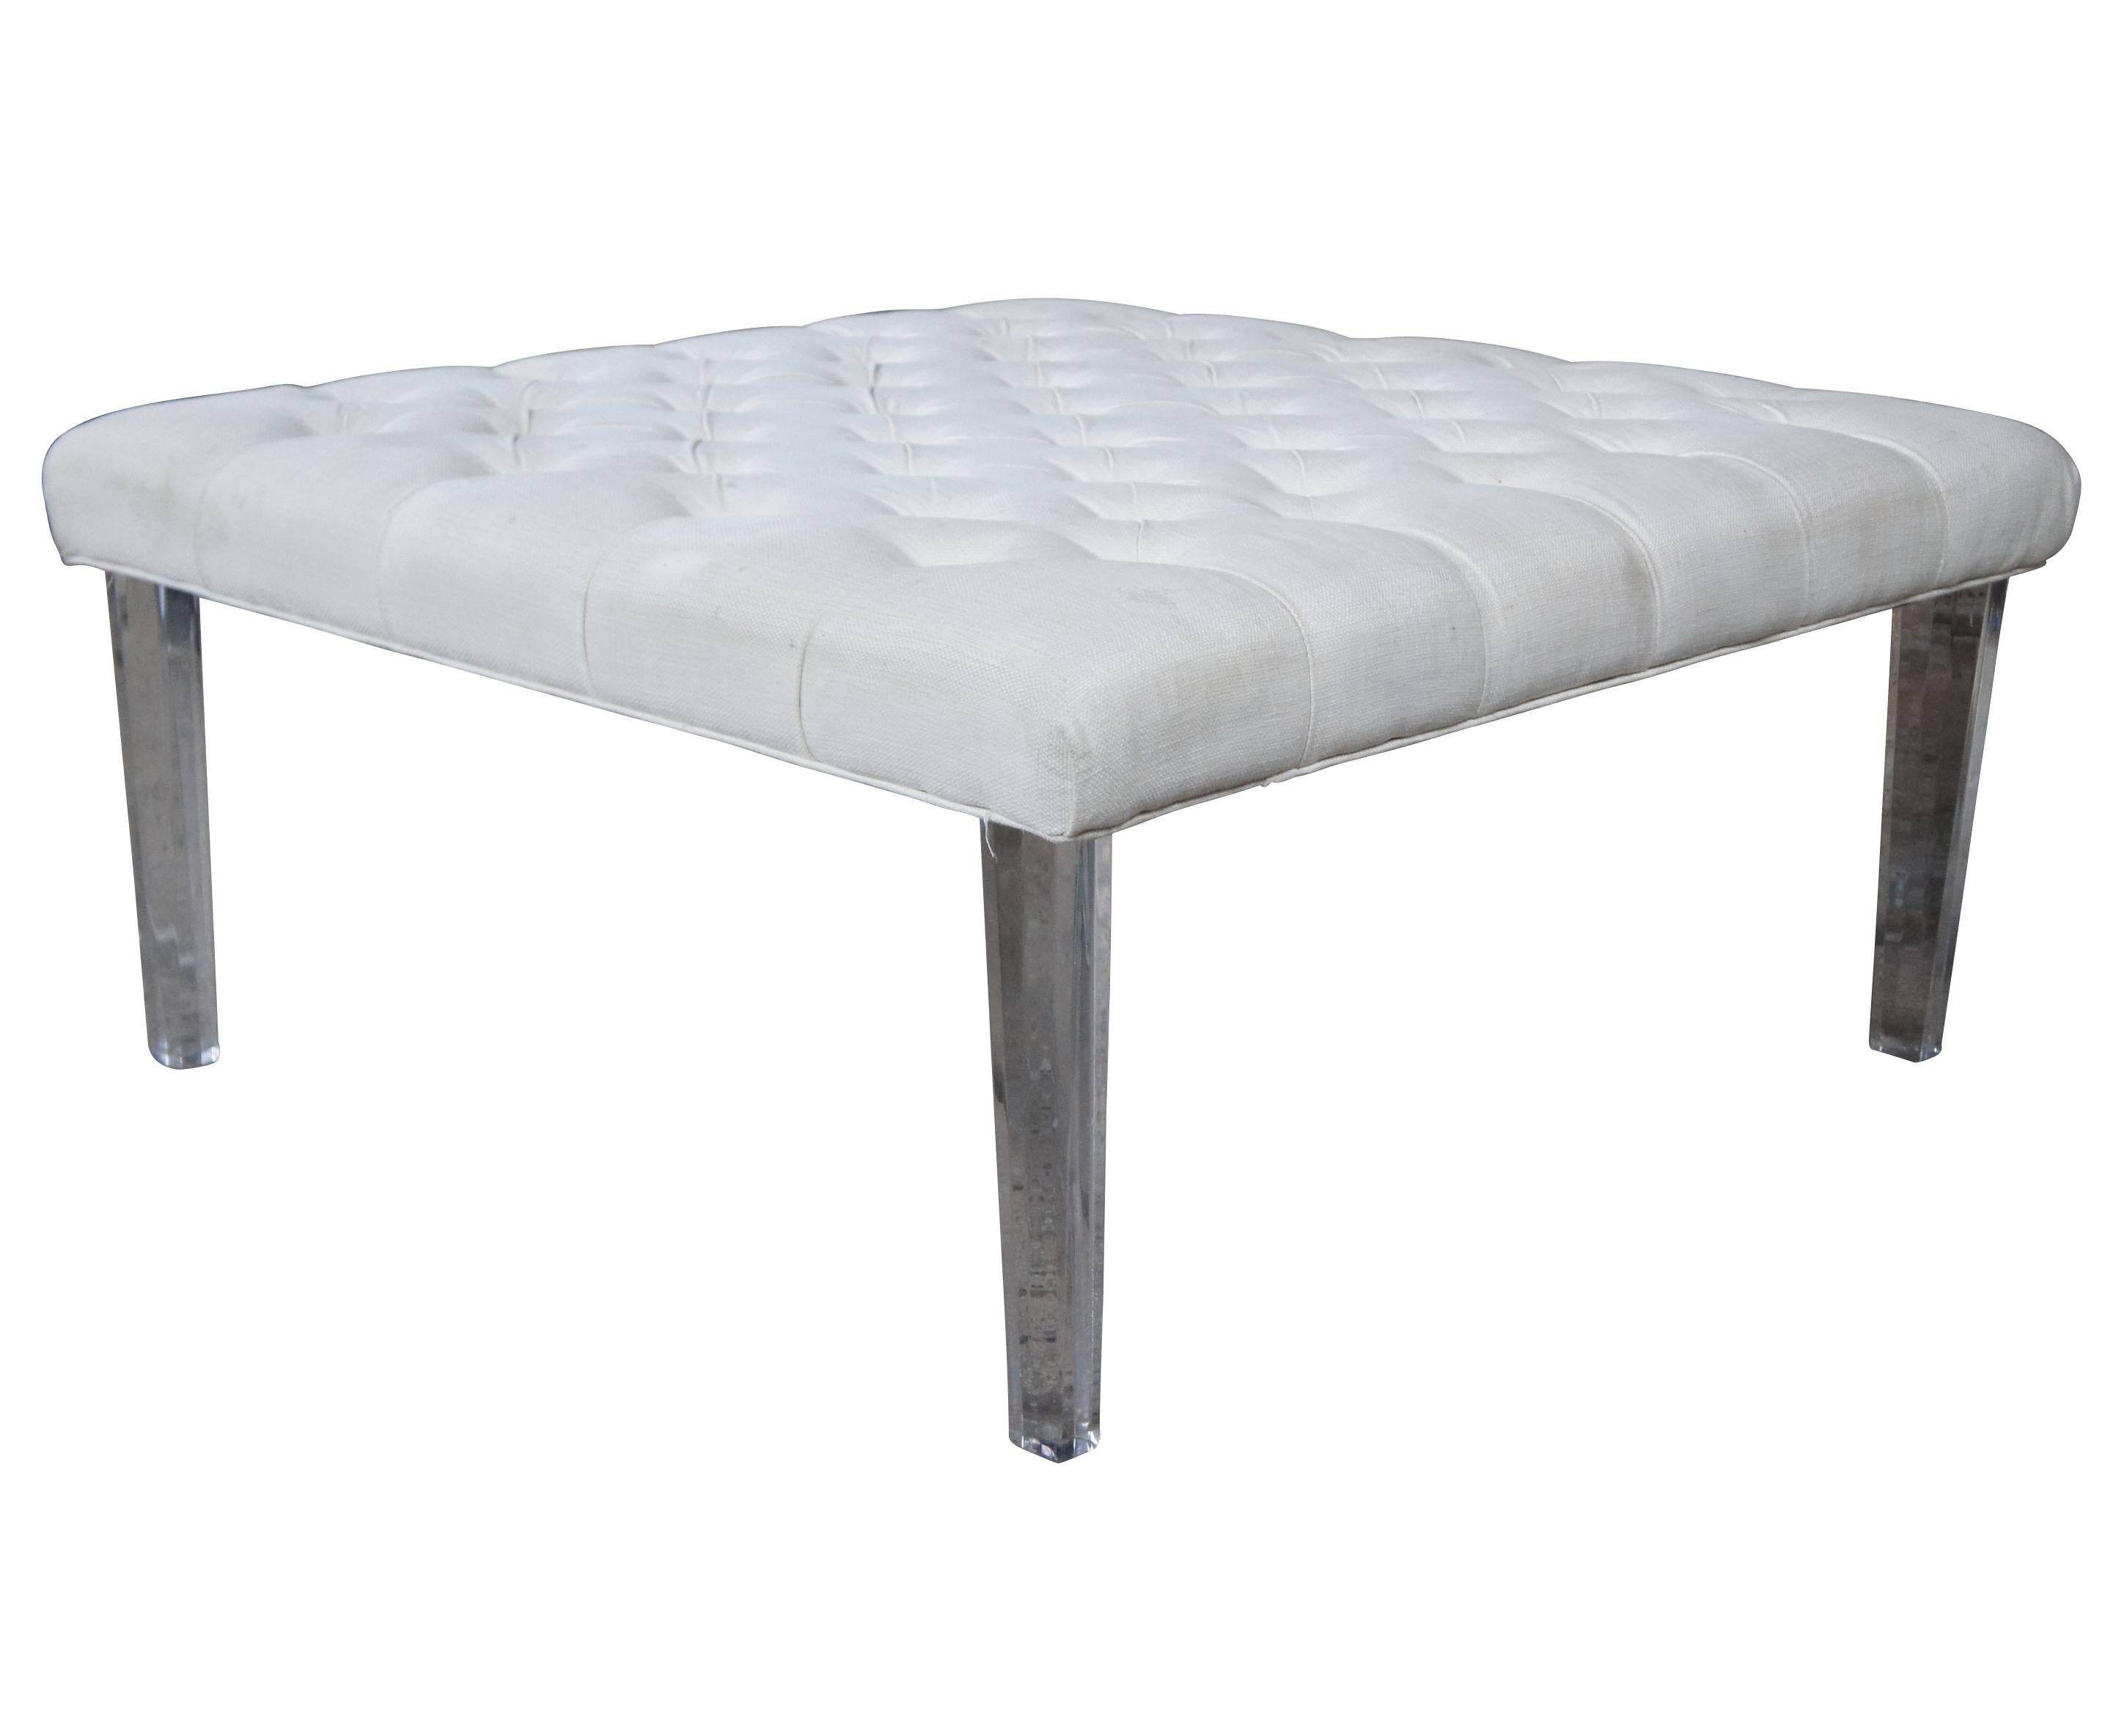 Modern upholstered ottoman in white with tufting. Supported by acrylic contoured legs.